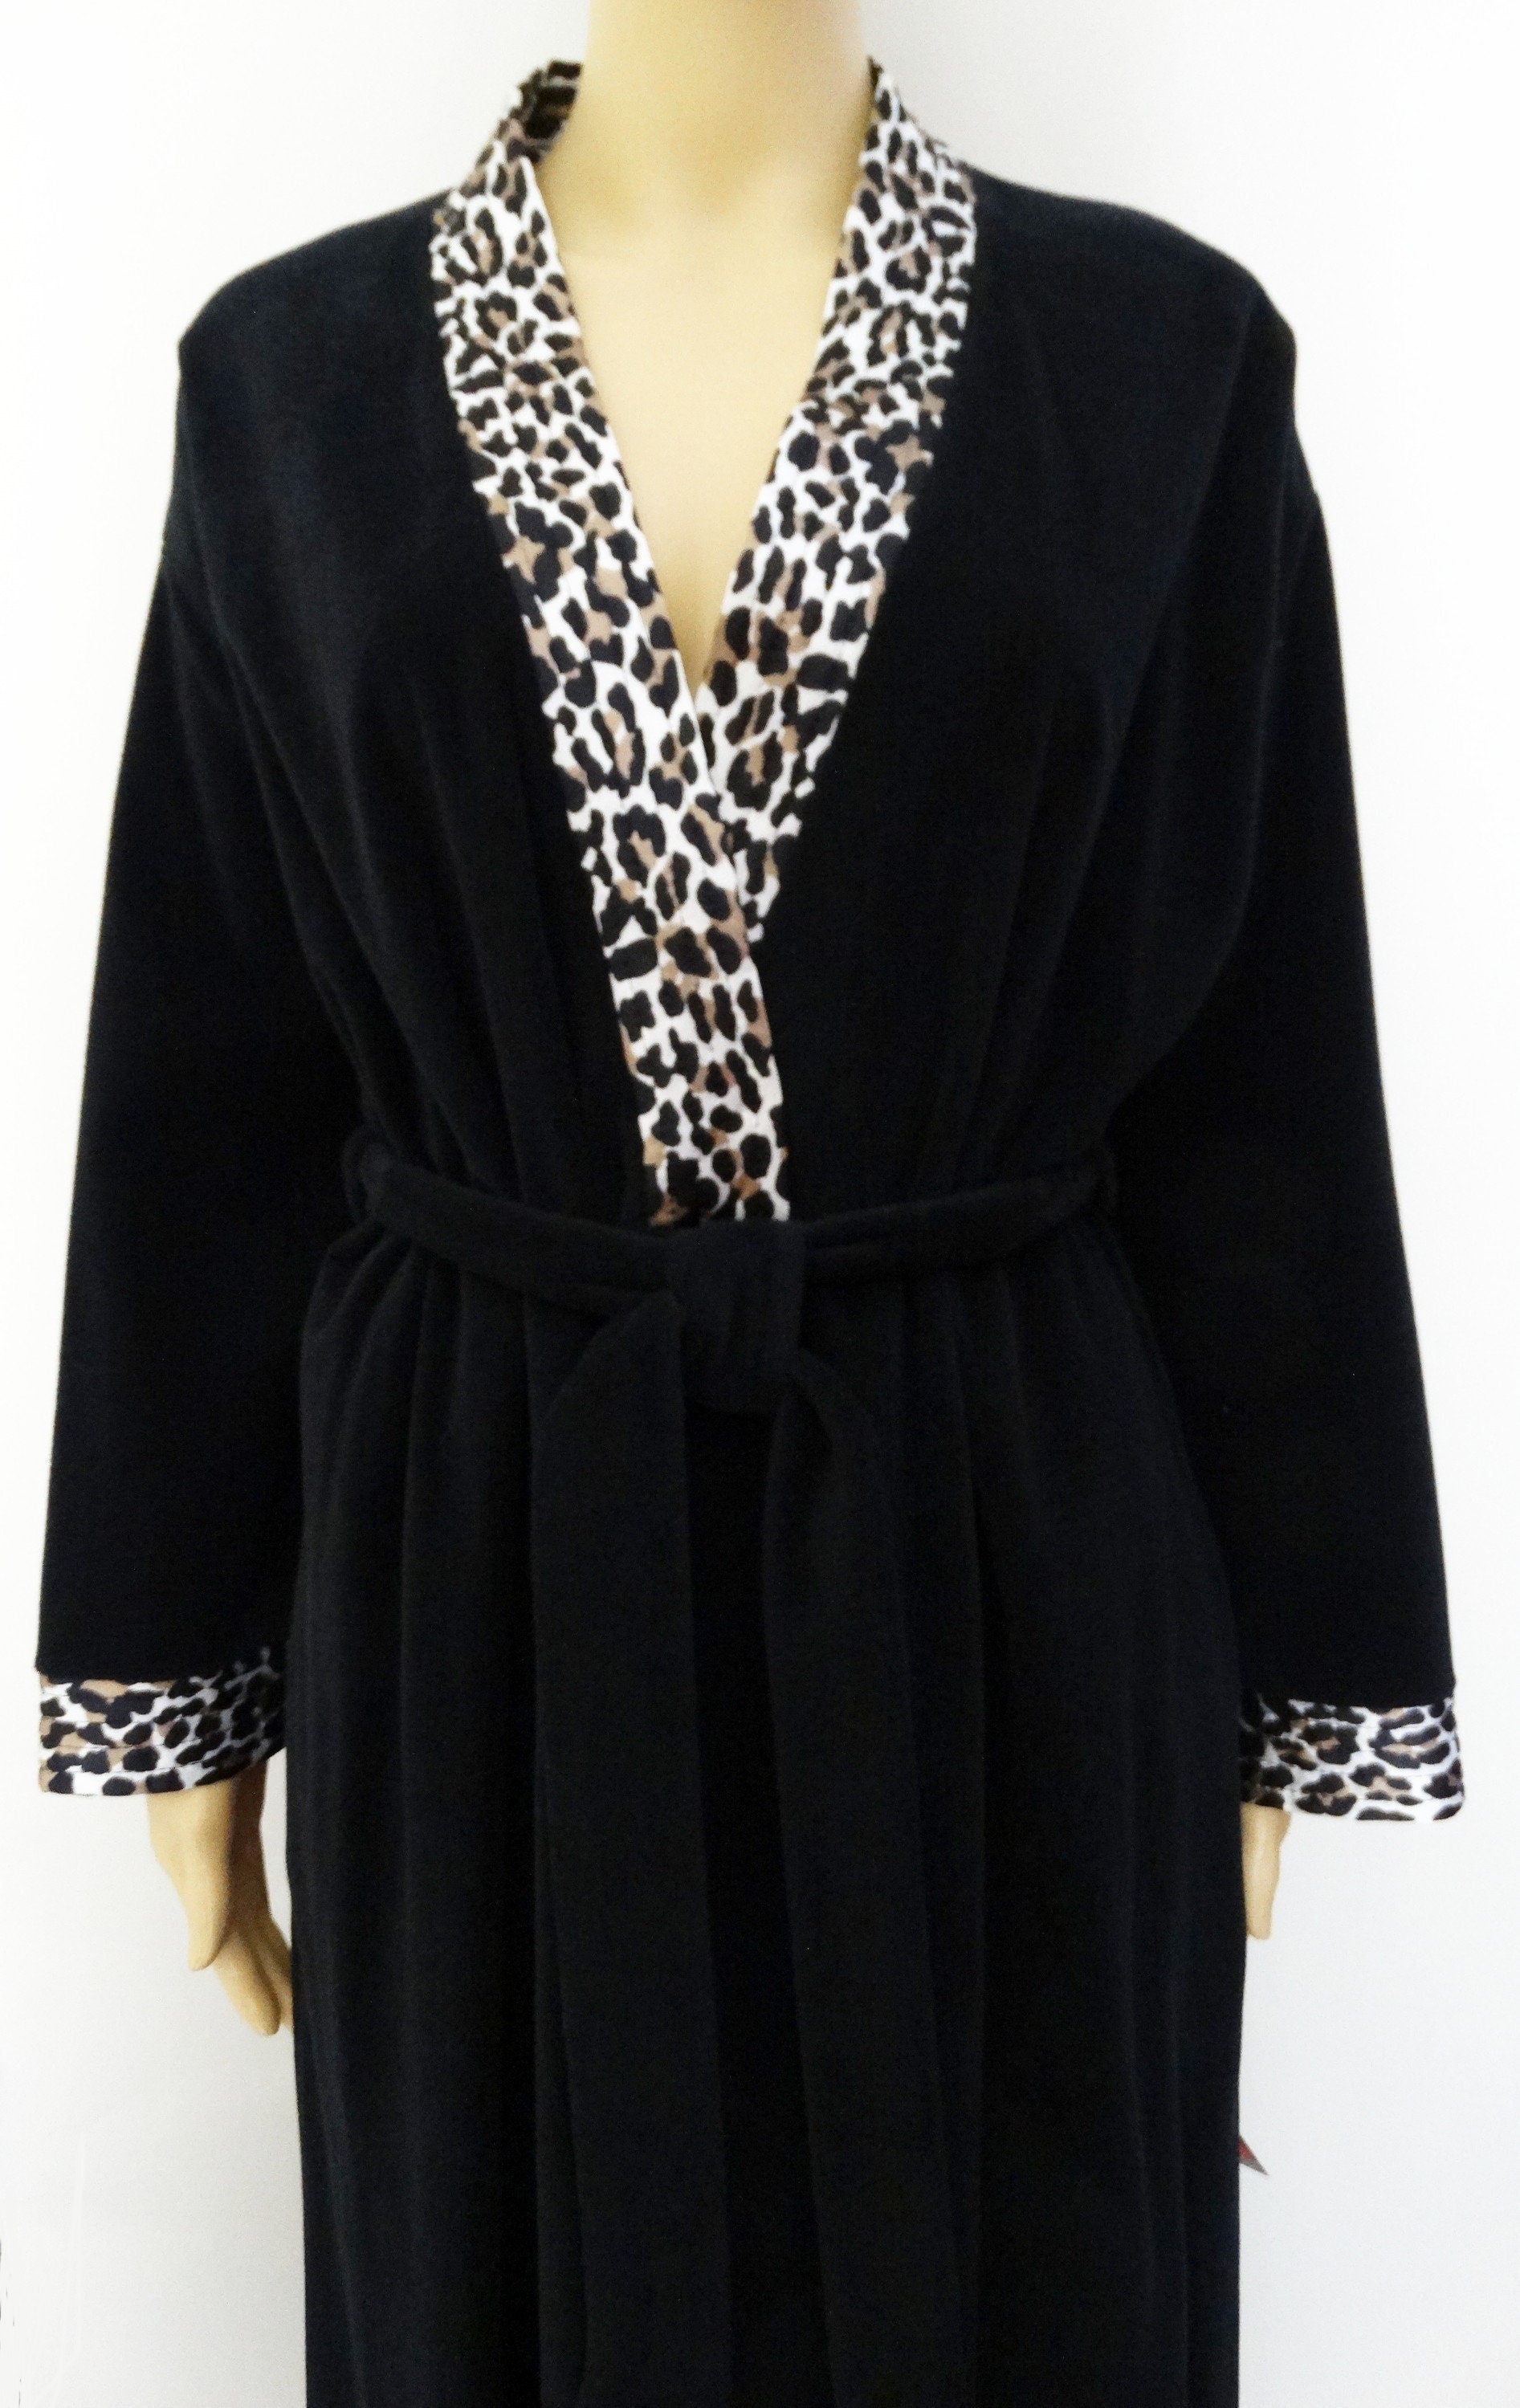 Black With Leopard Trim Dressing Gown Tags Attached Size Medium Vintage Vanity Fair Robe